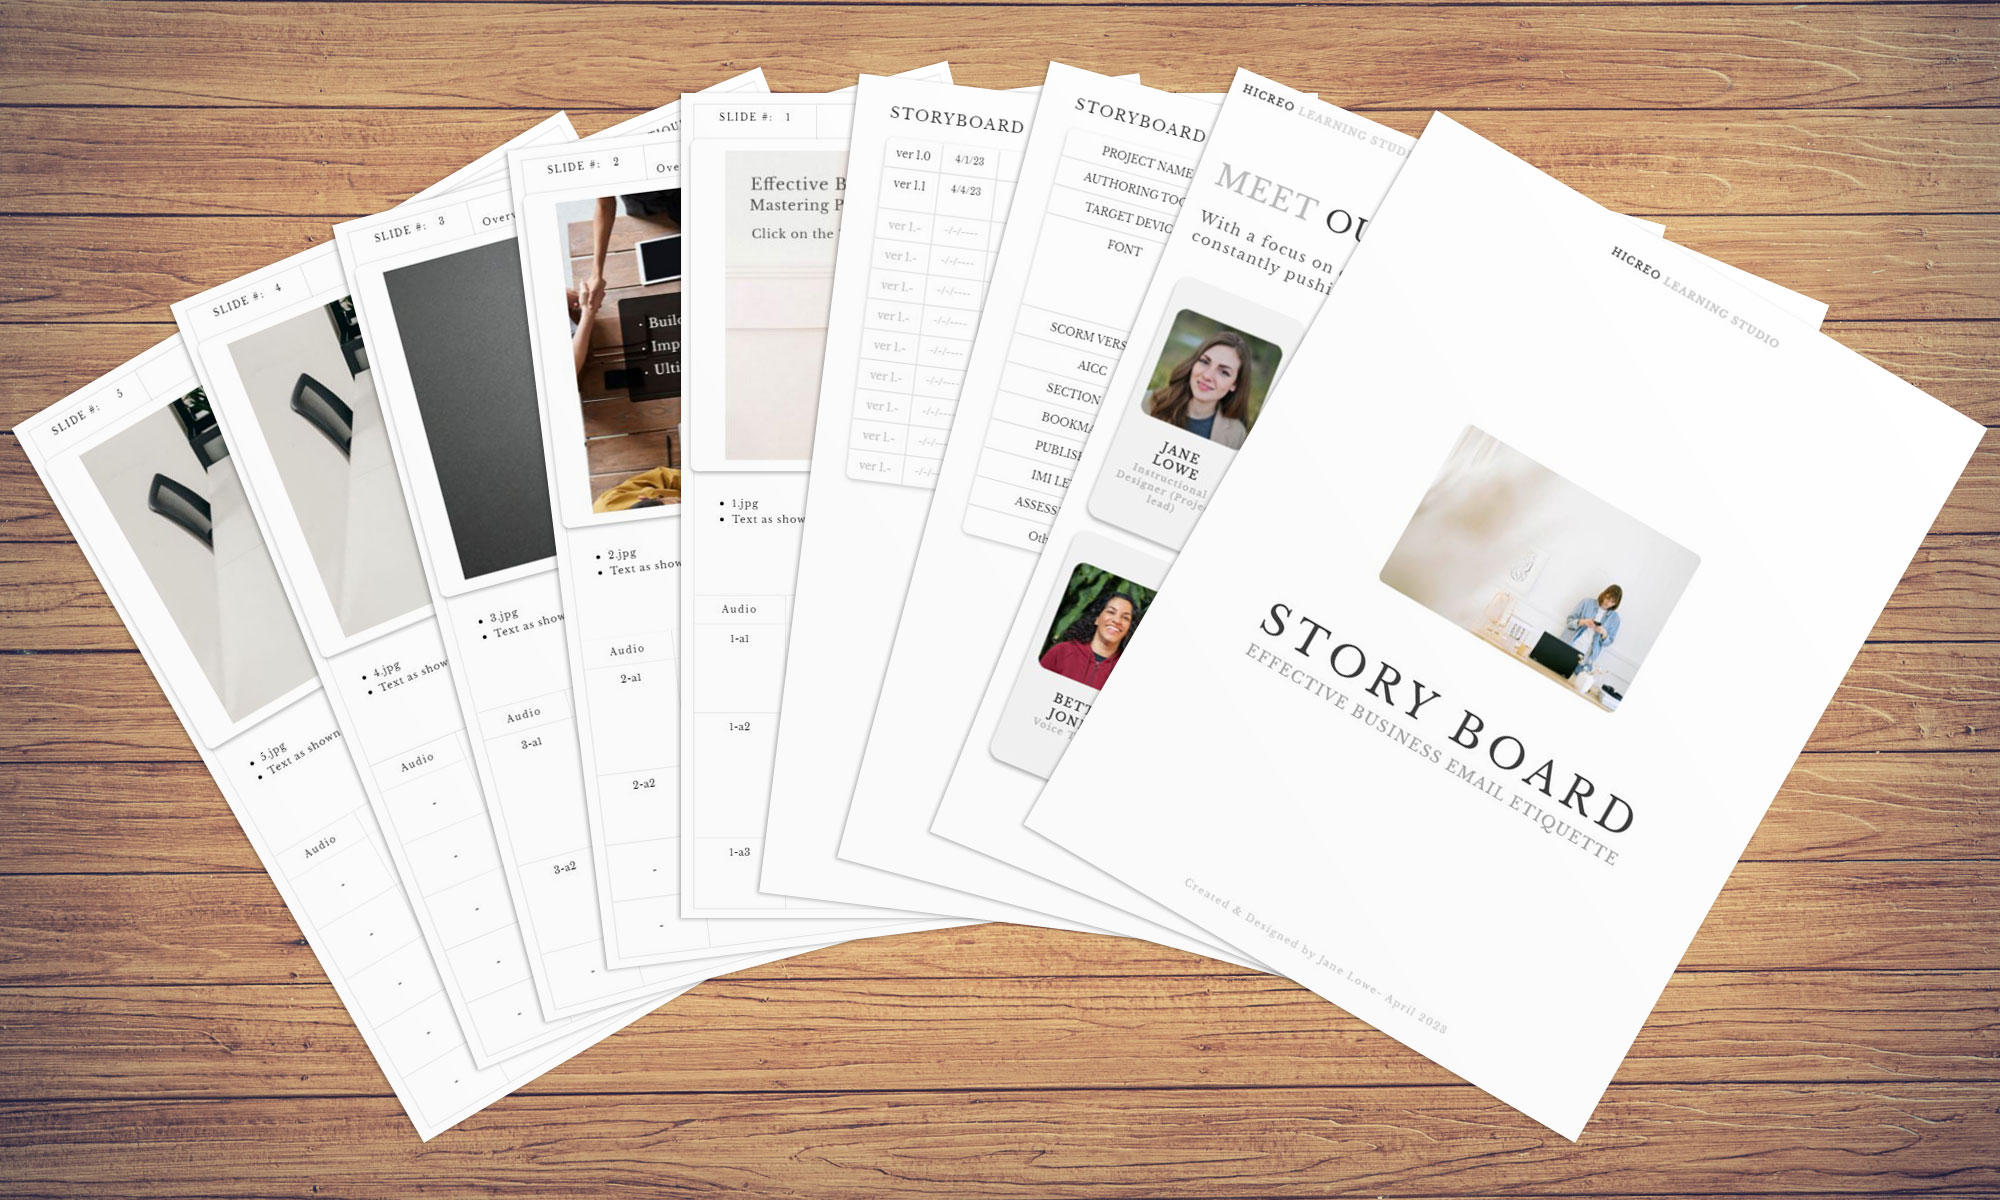 eLearning storyboard templates spread on a desk with the course title 'Effective Business Email Etiquette' created using the hiCreo platform